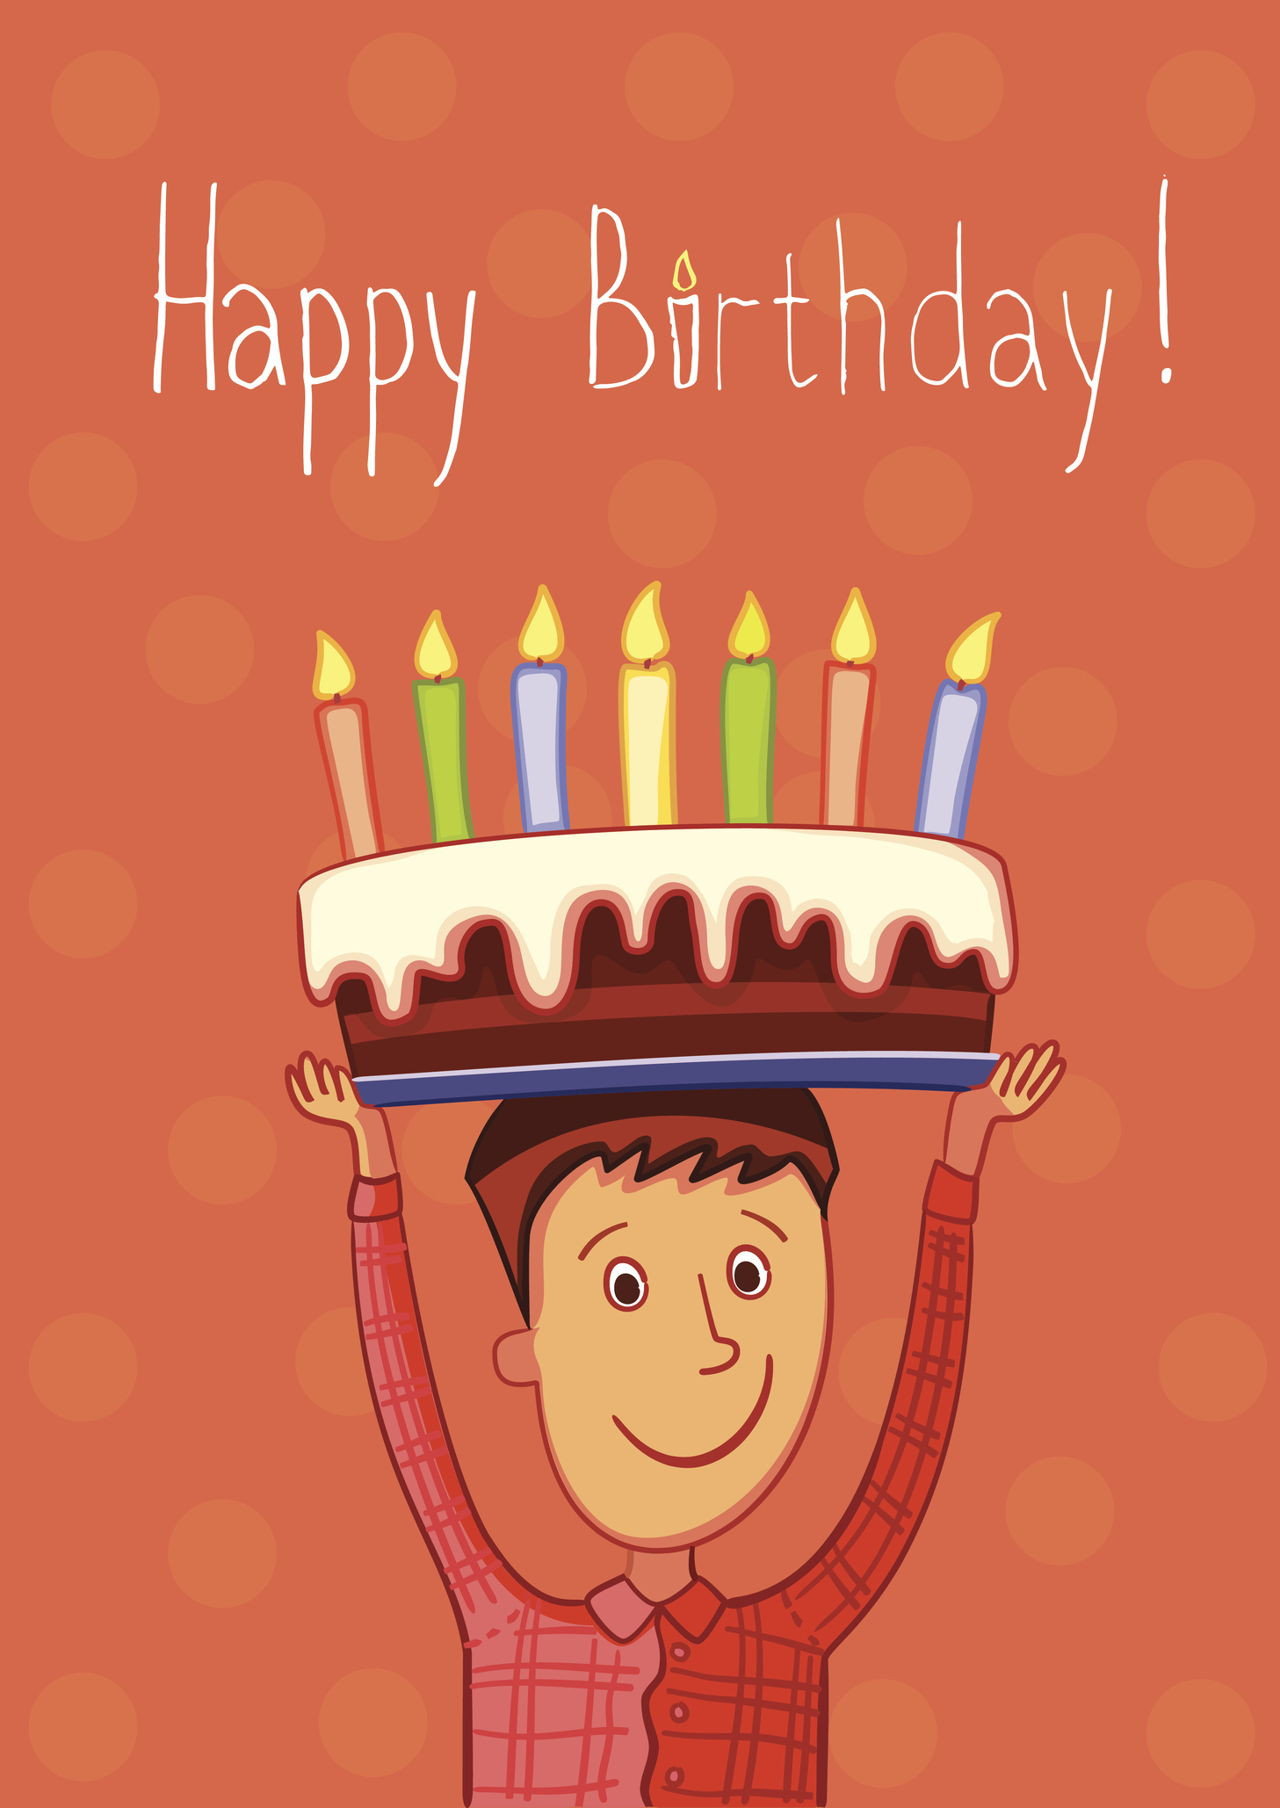 Boy Birthday Quotes
 These are the Cutest Birthday Quotes for Friends You ll